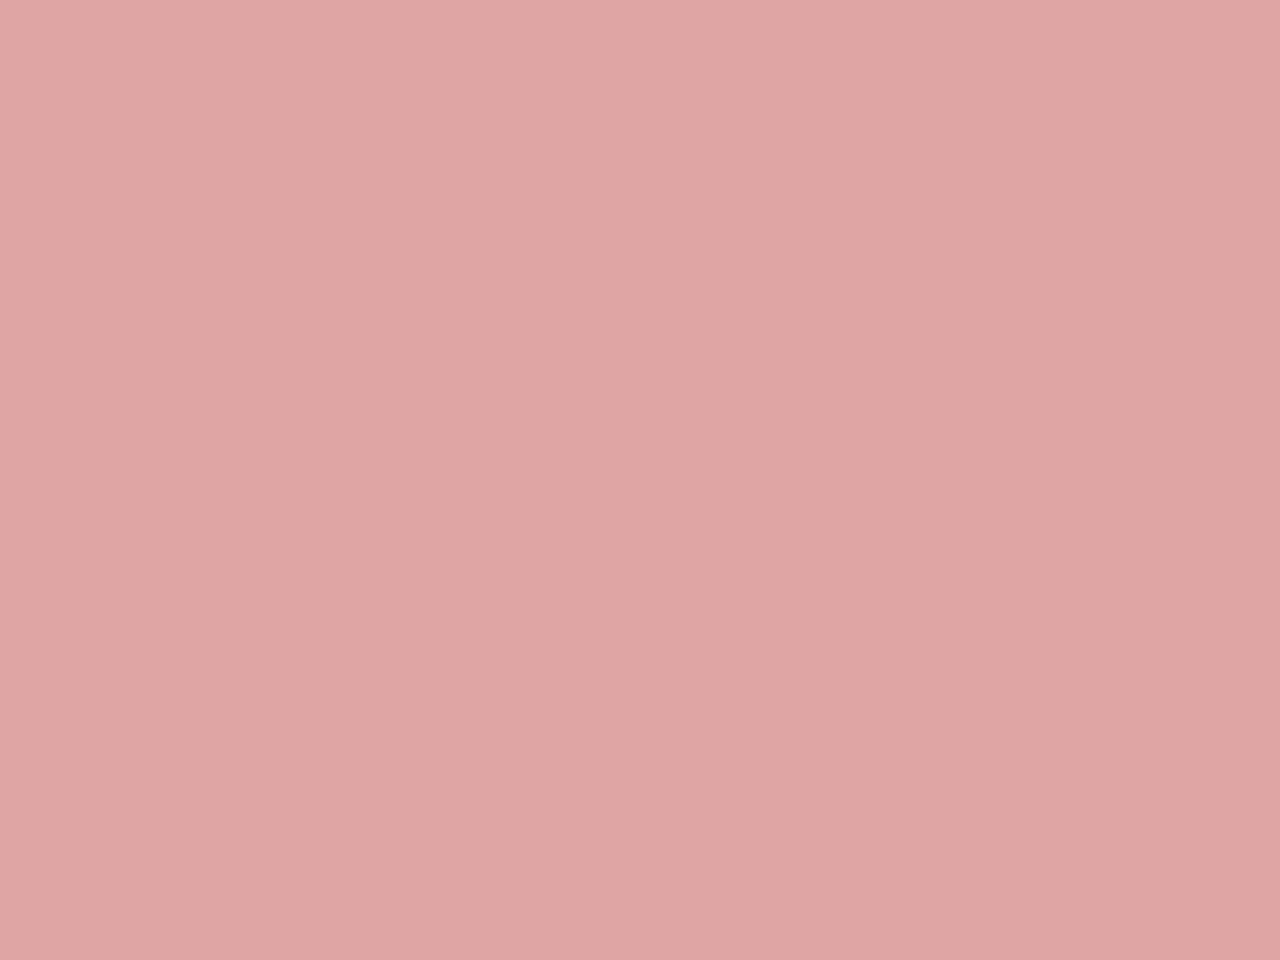 1280x960 Pastel Pink Solid Color Background